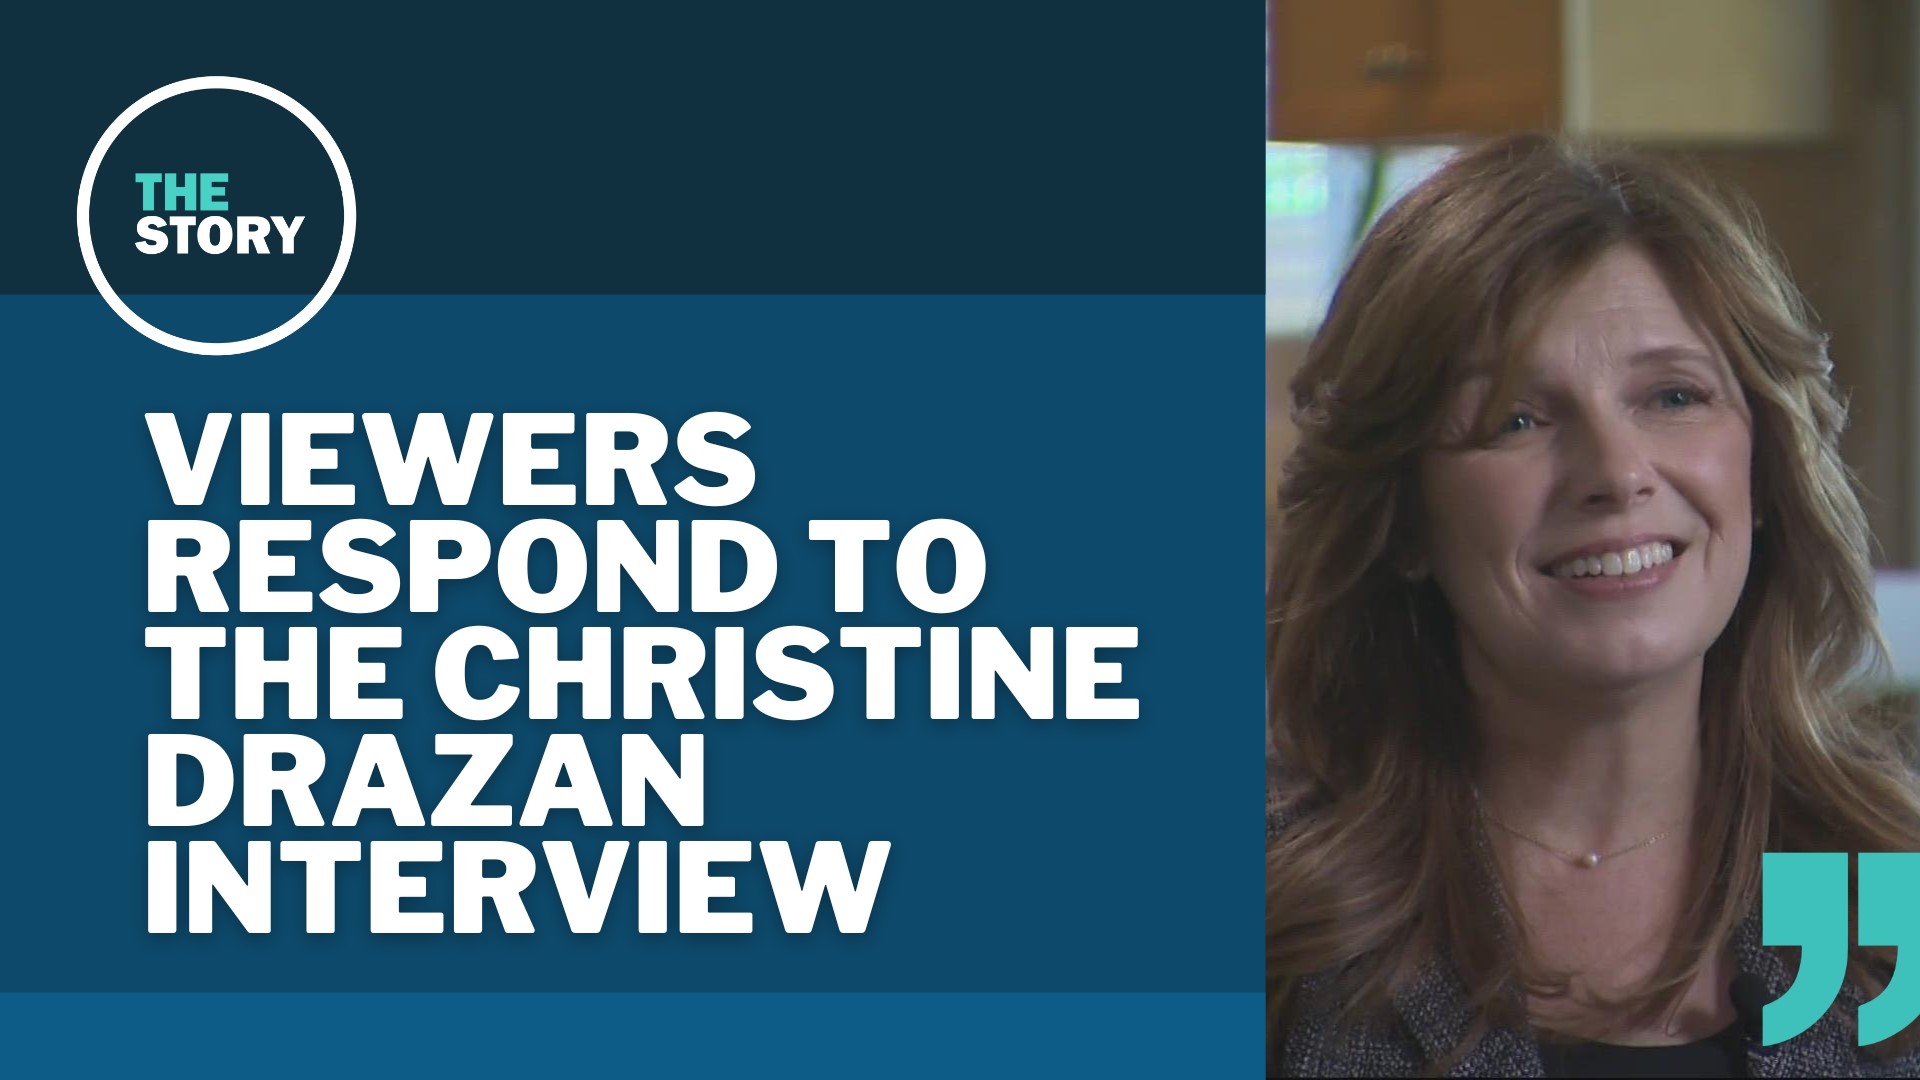 Last night we aired our interview with Republican gubernatorial candidate Christine Drazan. The Story viewers shared their thoughts with us.